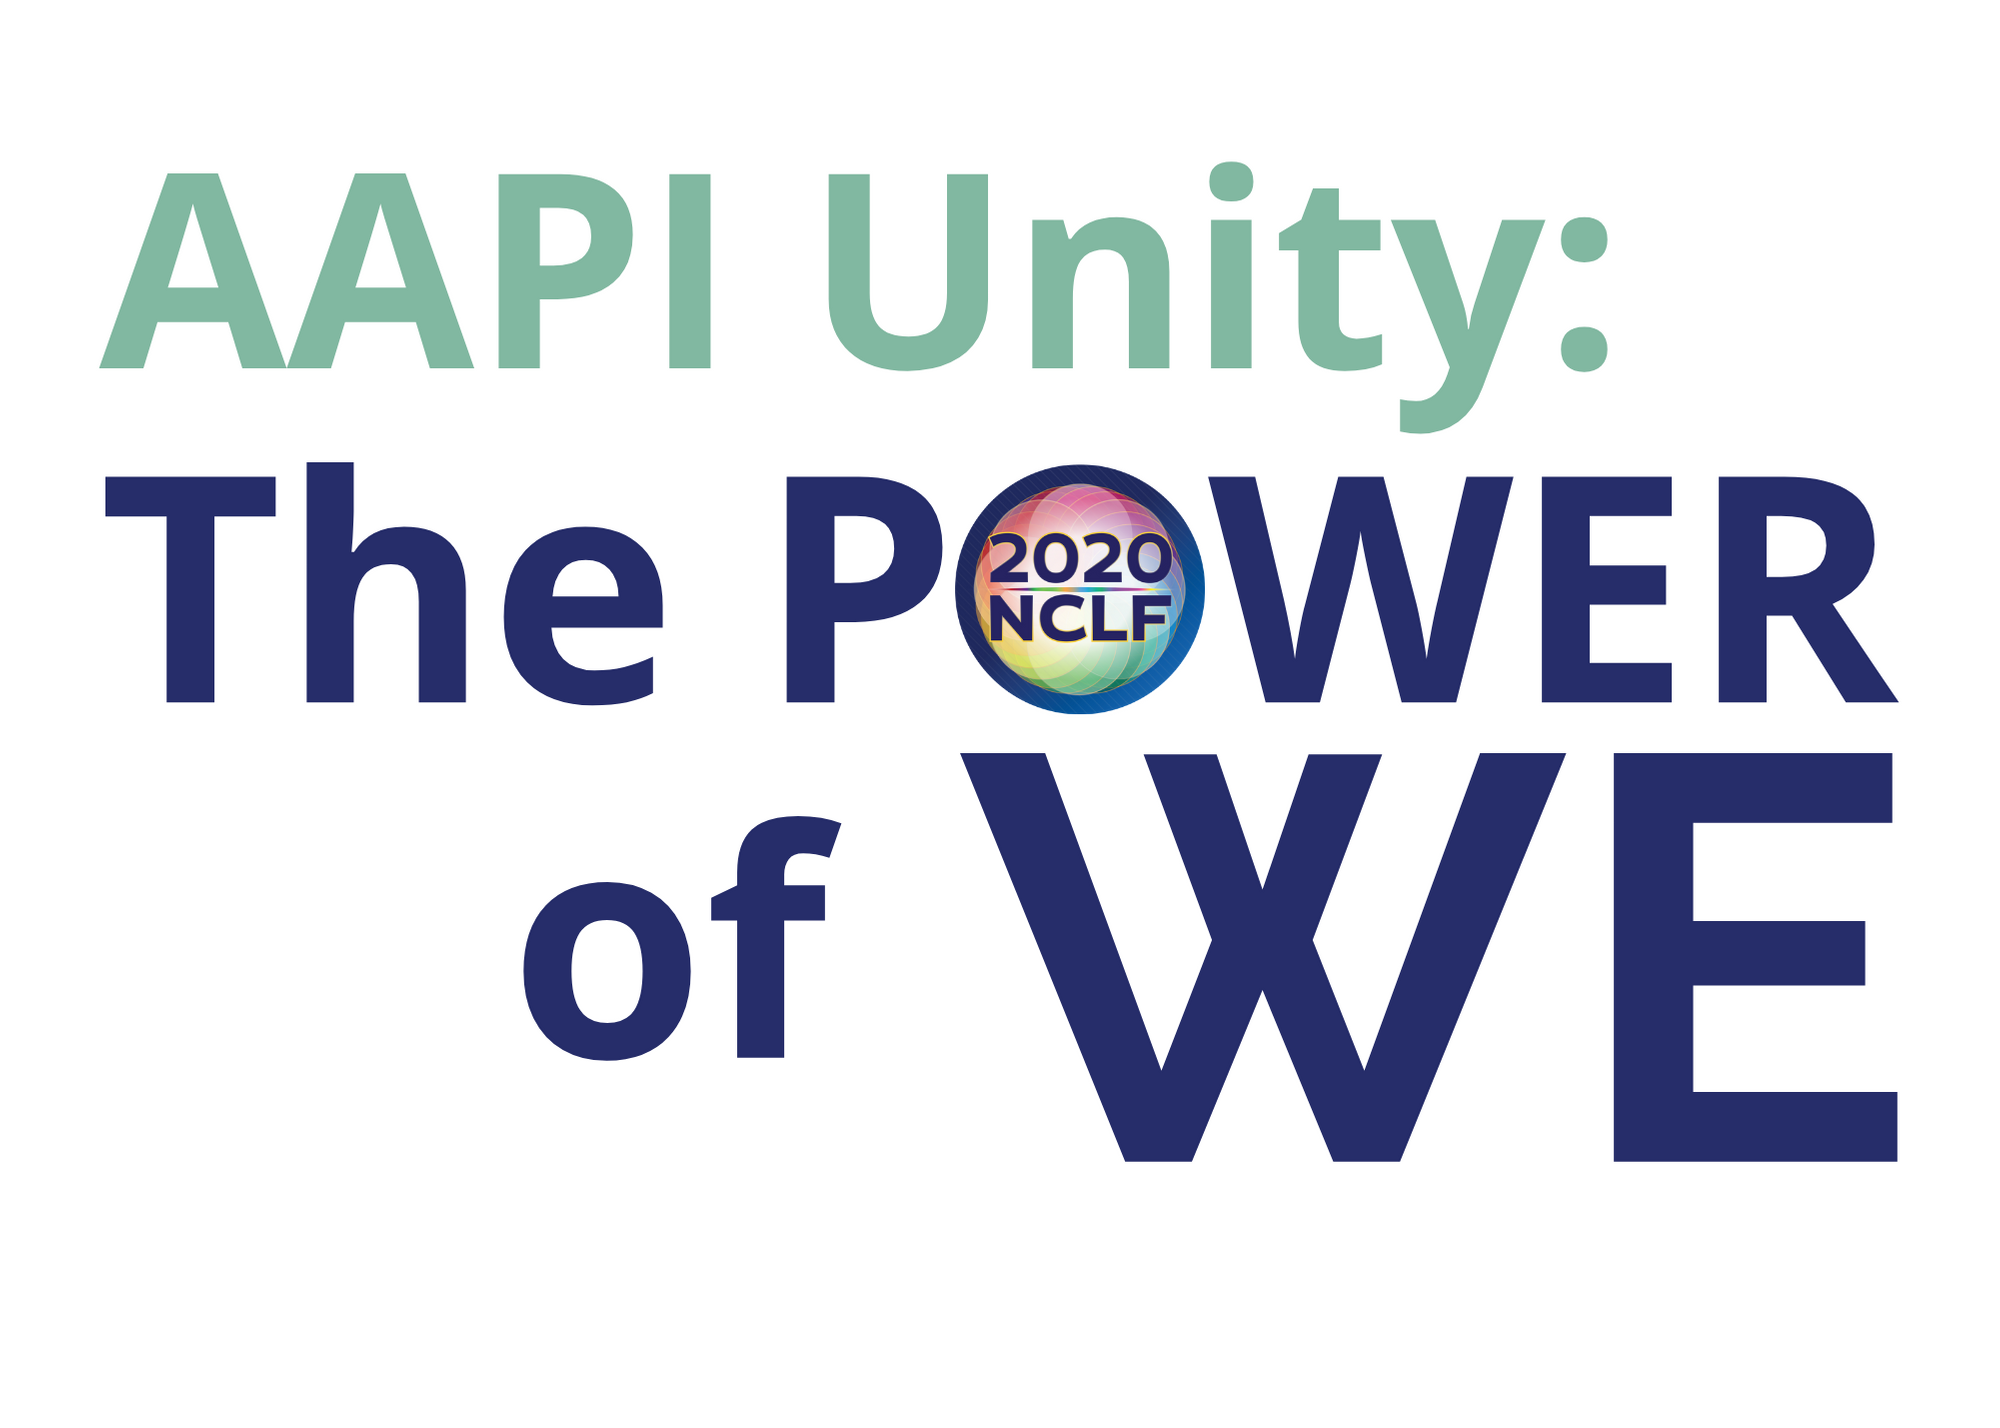 NCLF 2020 AAPI Unity The Power of We